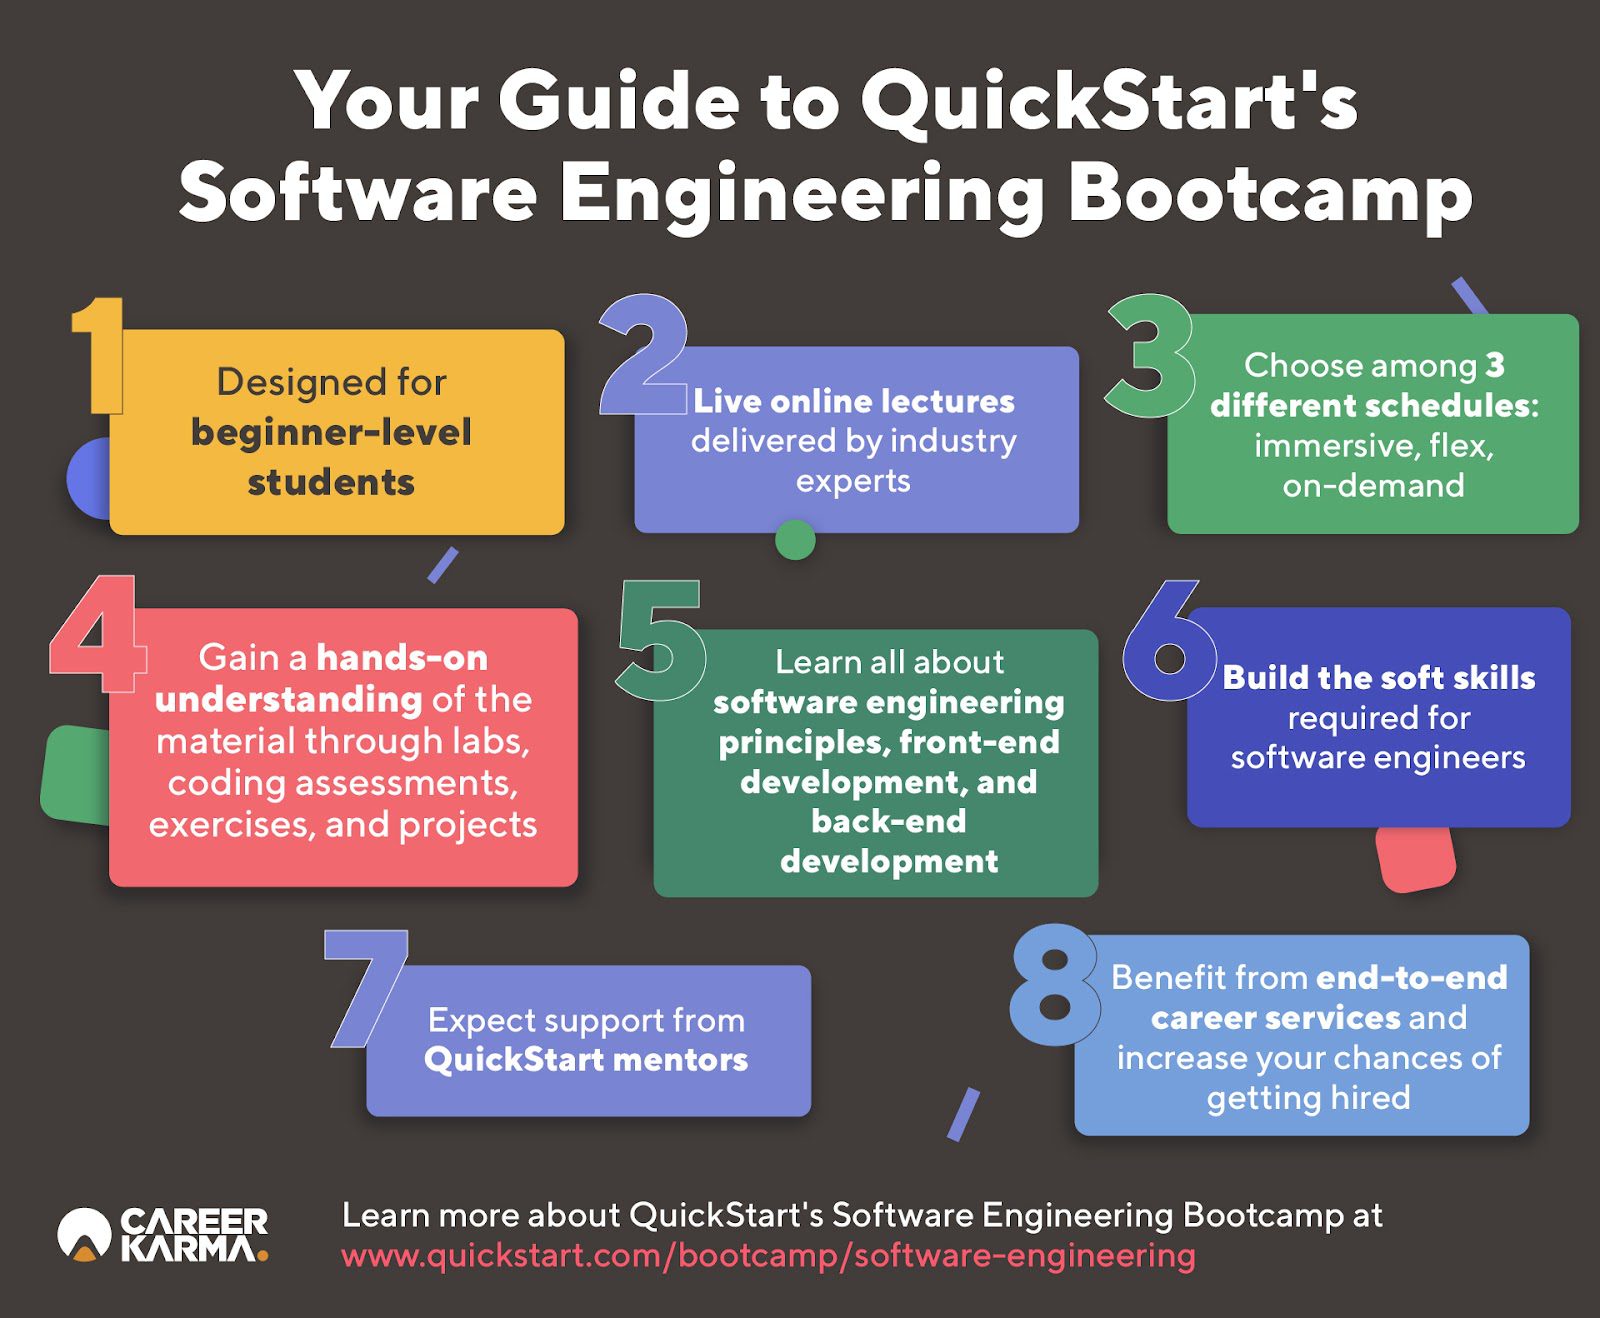 An infographic showing a quick overview of QuickStart’s Software Engineering Bootcamp 